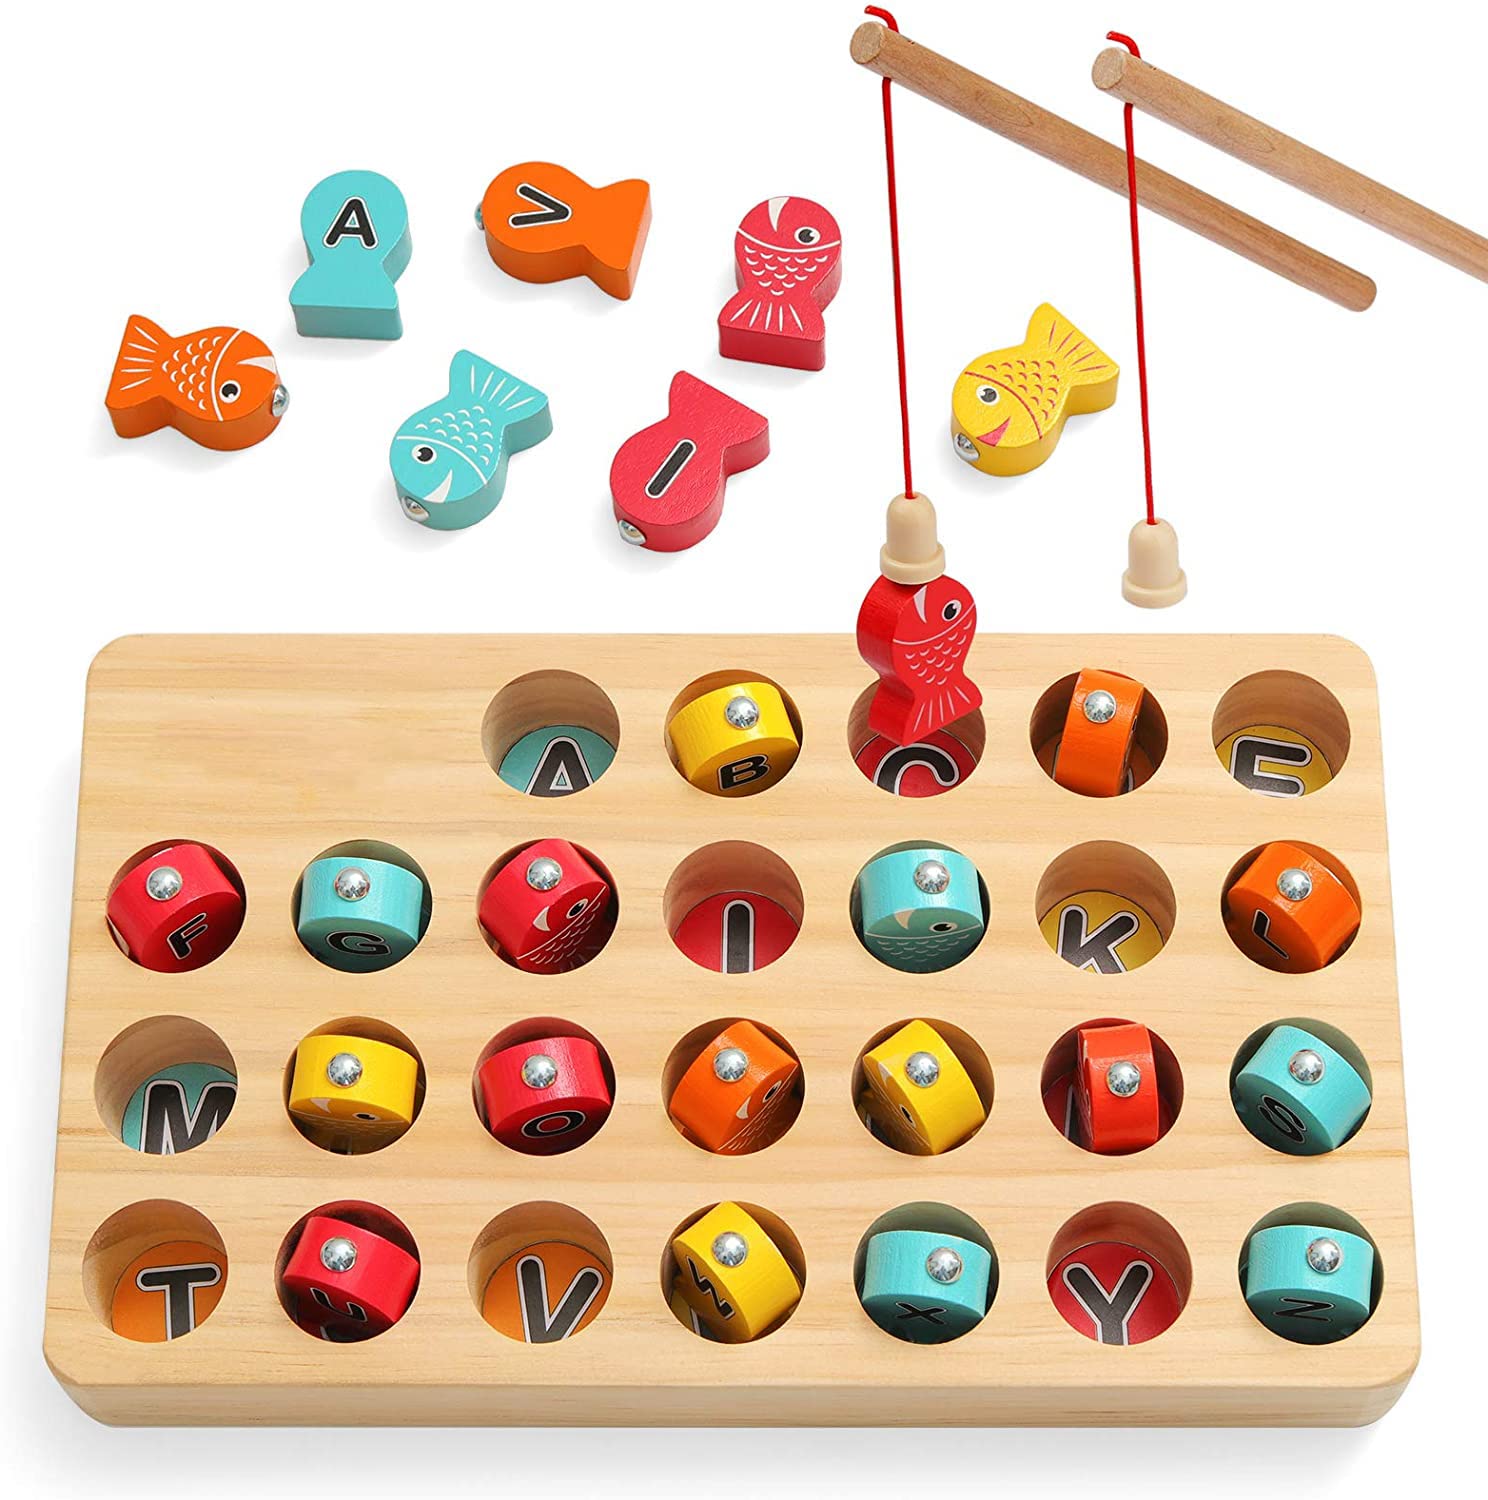 Wooden Magnetic Fishing Game Kids Toys, Fish Catching Game with 26